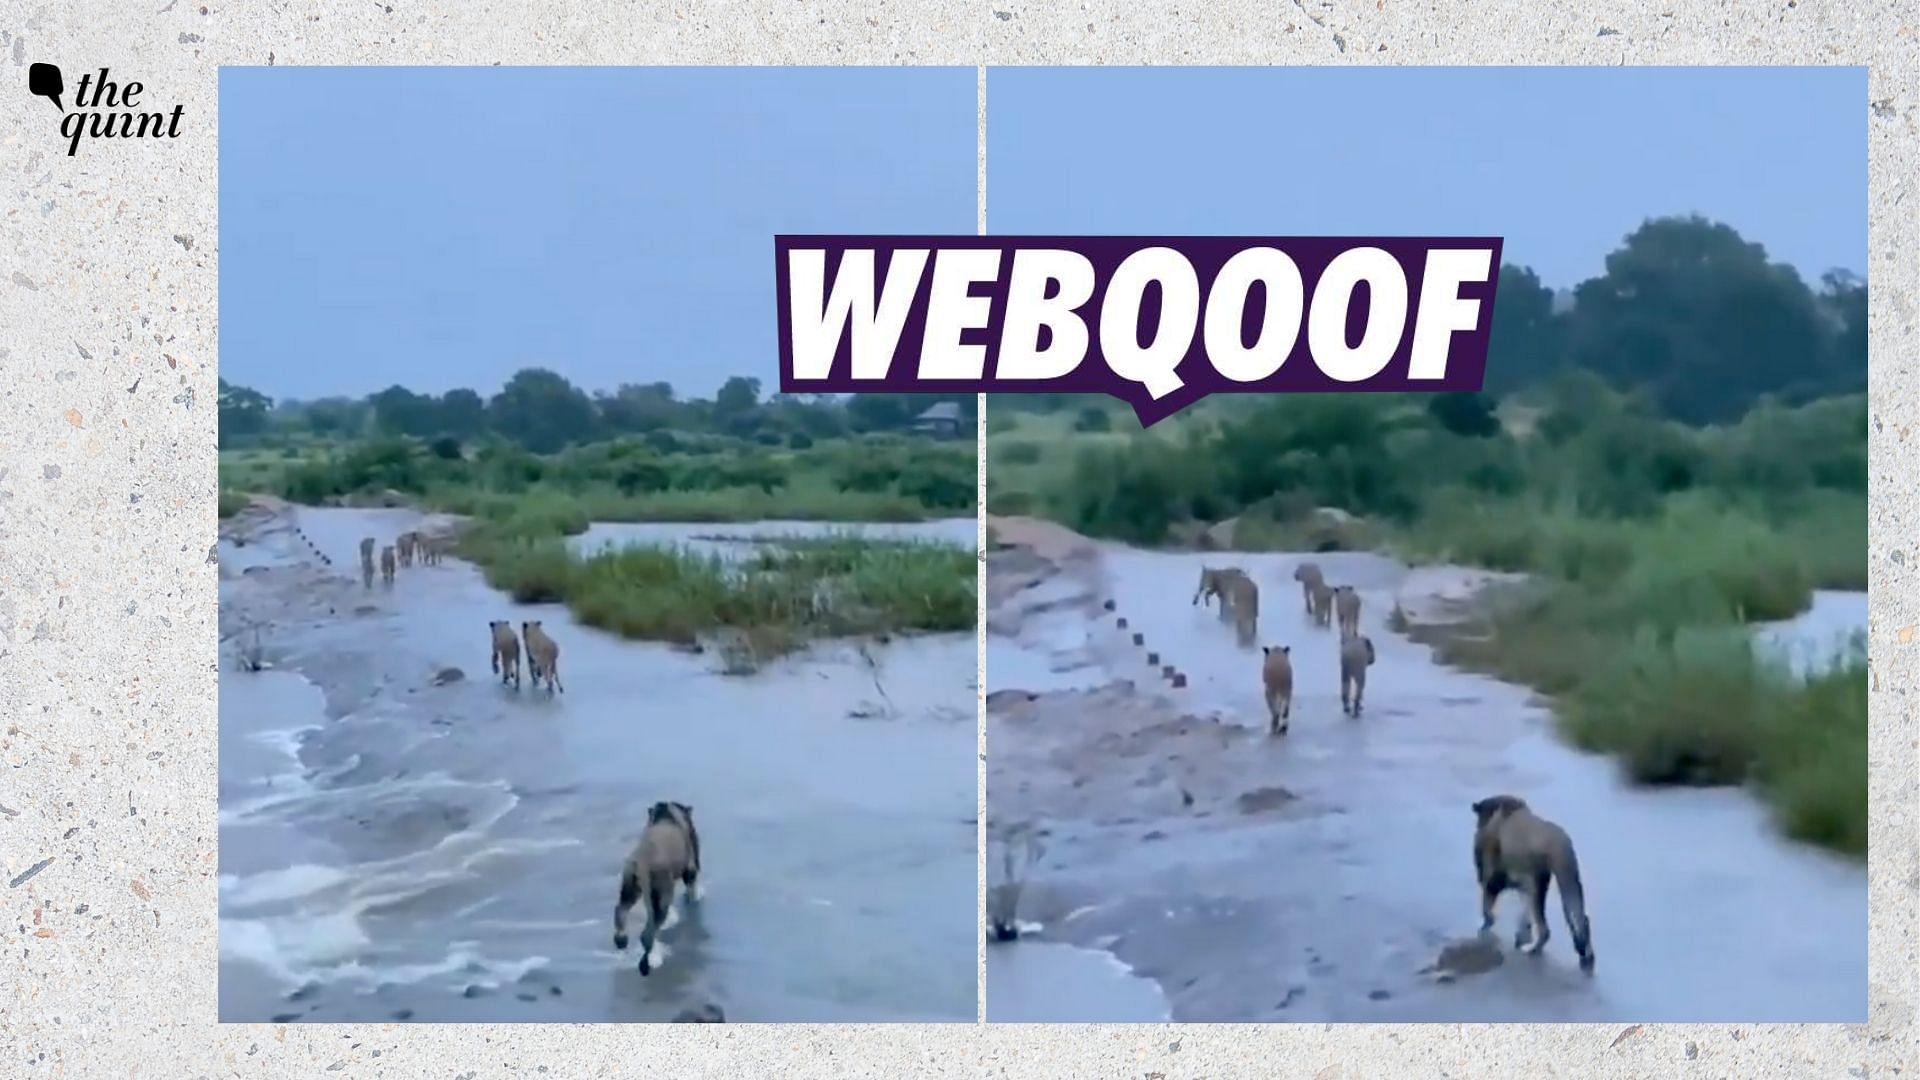 The viral video falsely claims that it shows Gir lions in Gujarat.